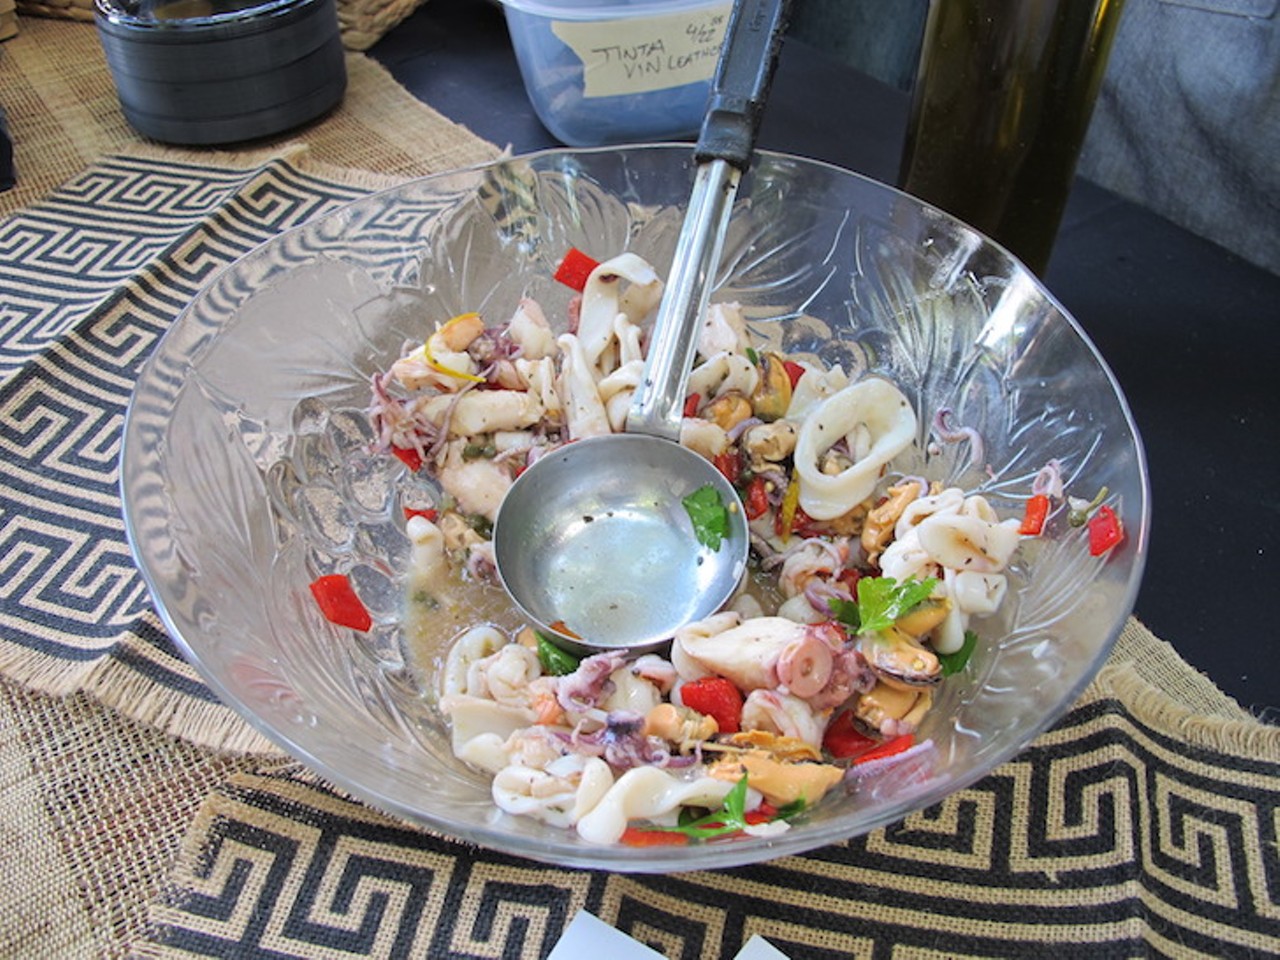 Octopus and seafood salad prepared by chefs Henry and Michelle Salgado